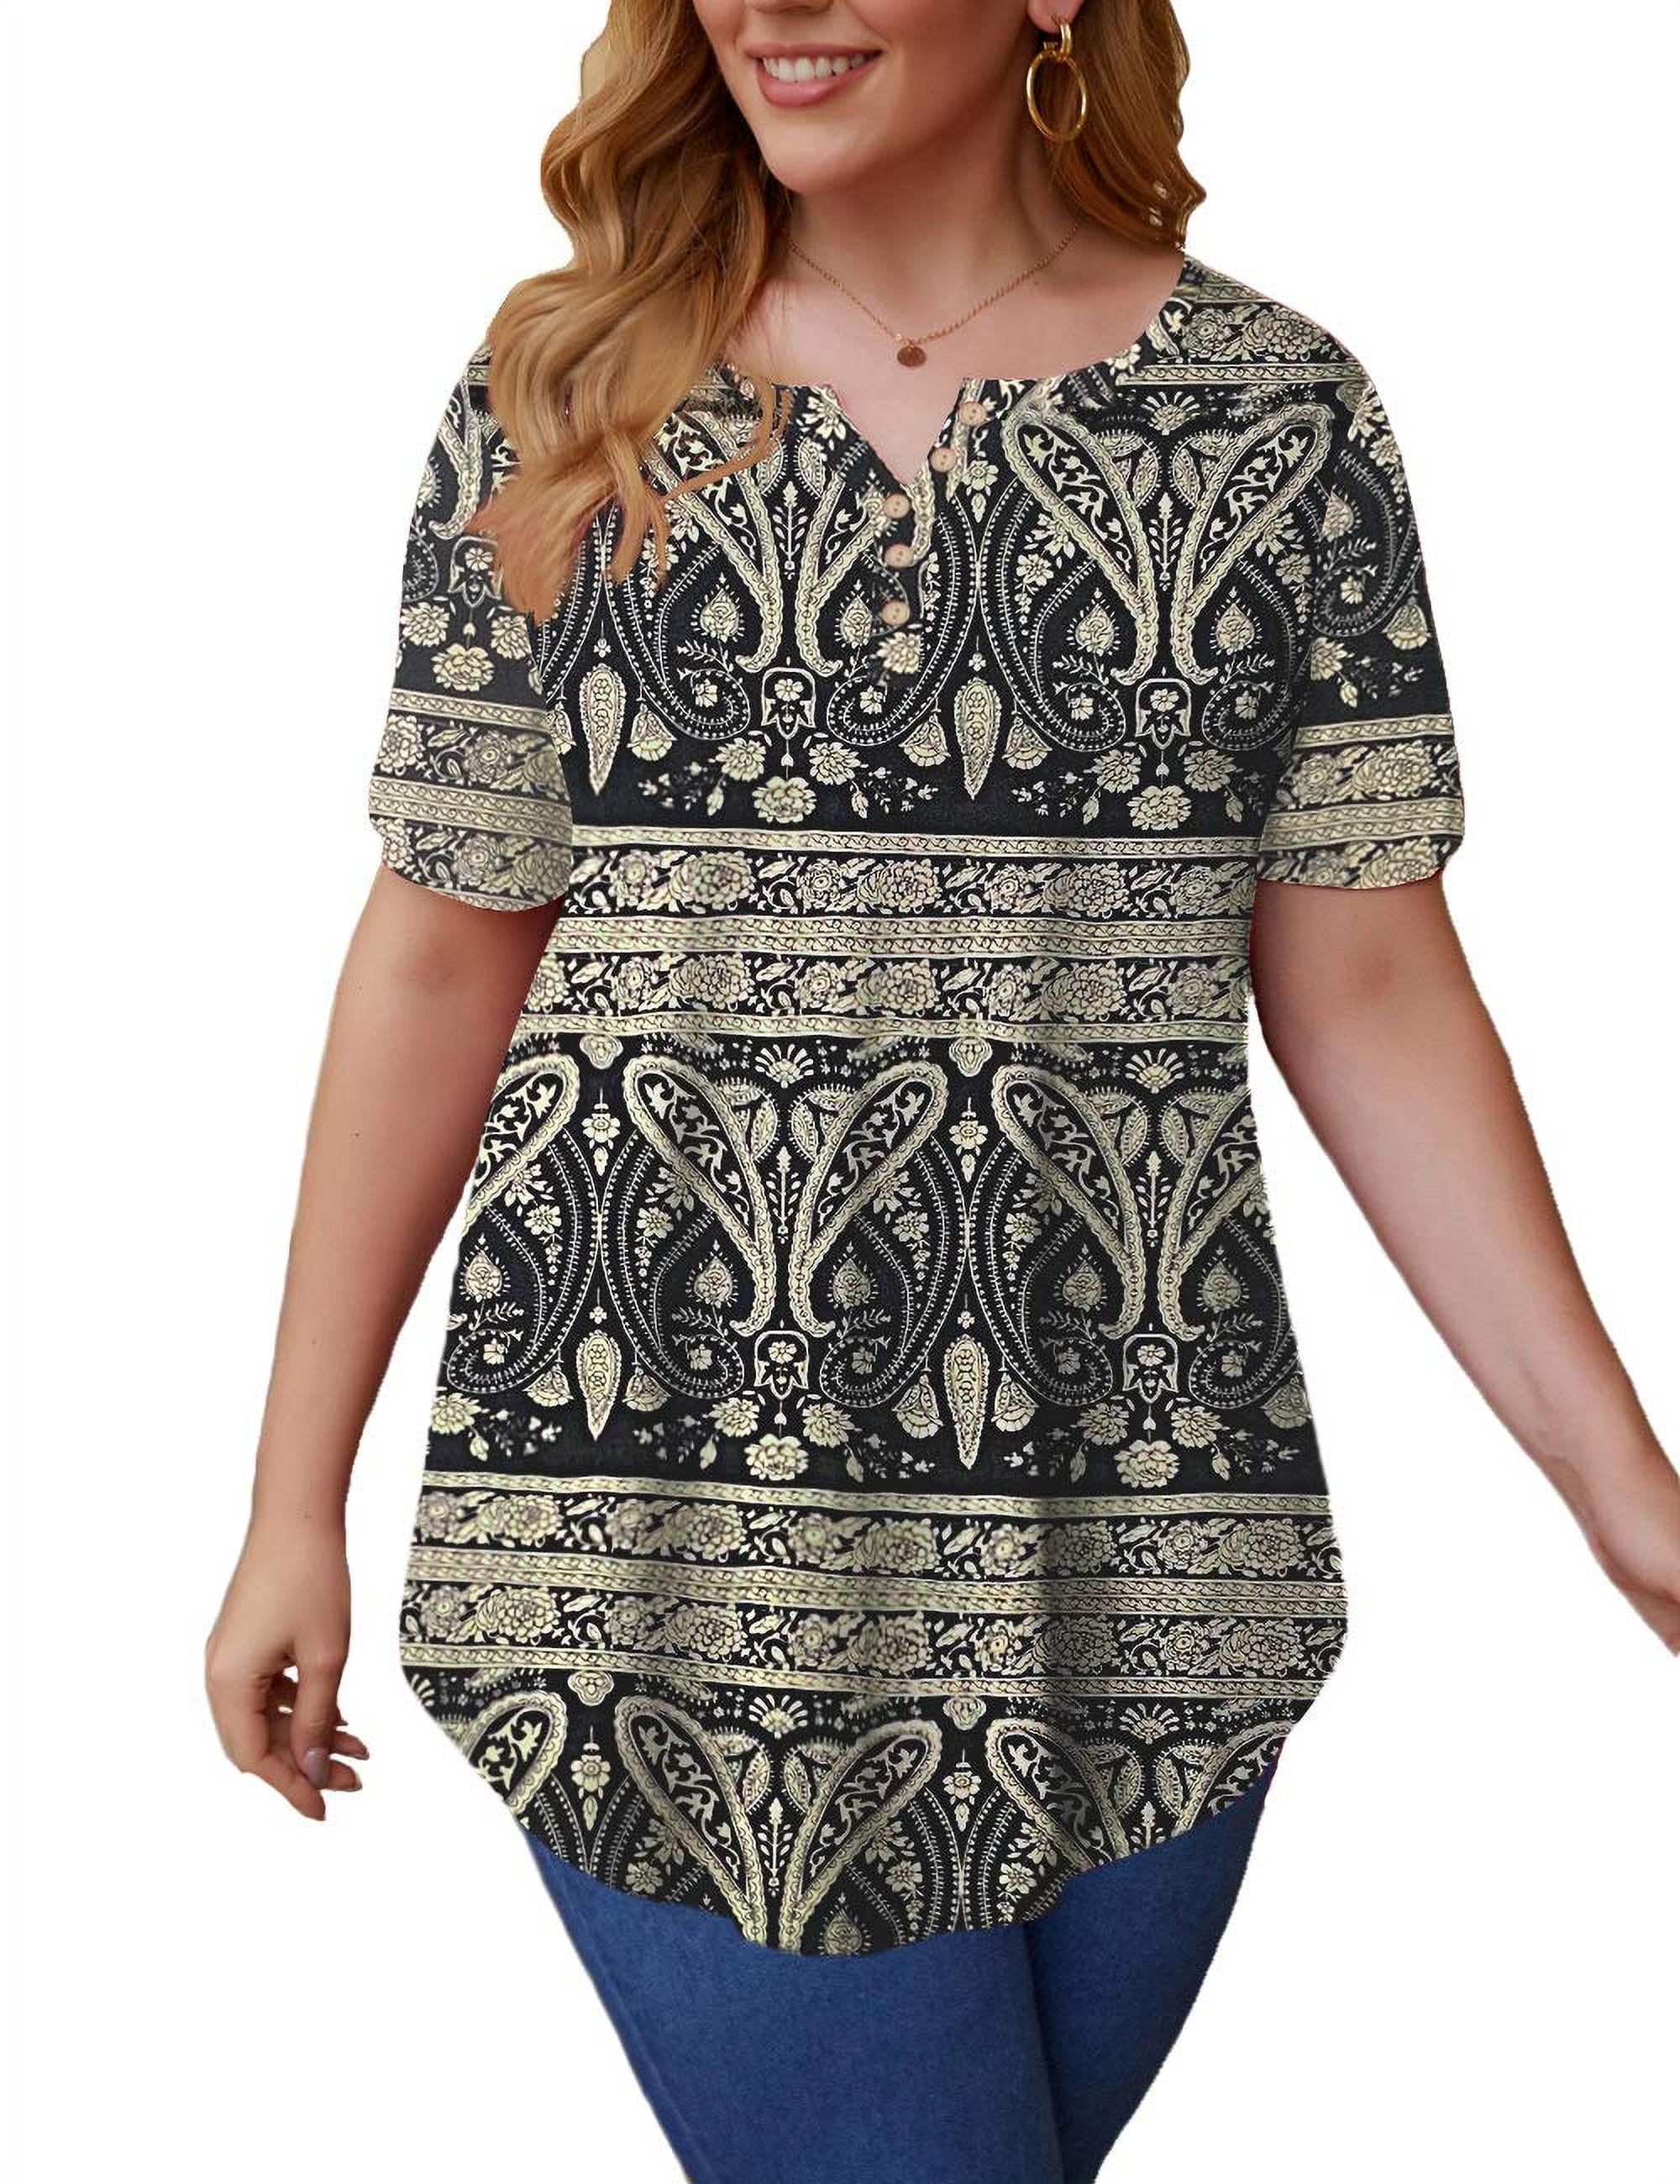 CLZOUD Plus Size T Shirts for Women Black Polyester,Spandex Womens Short  Sleeve Collared Shirts Summer Tunic Tops for Casual Xxl 